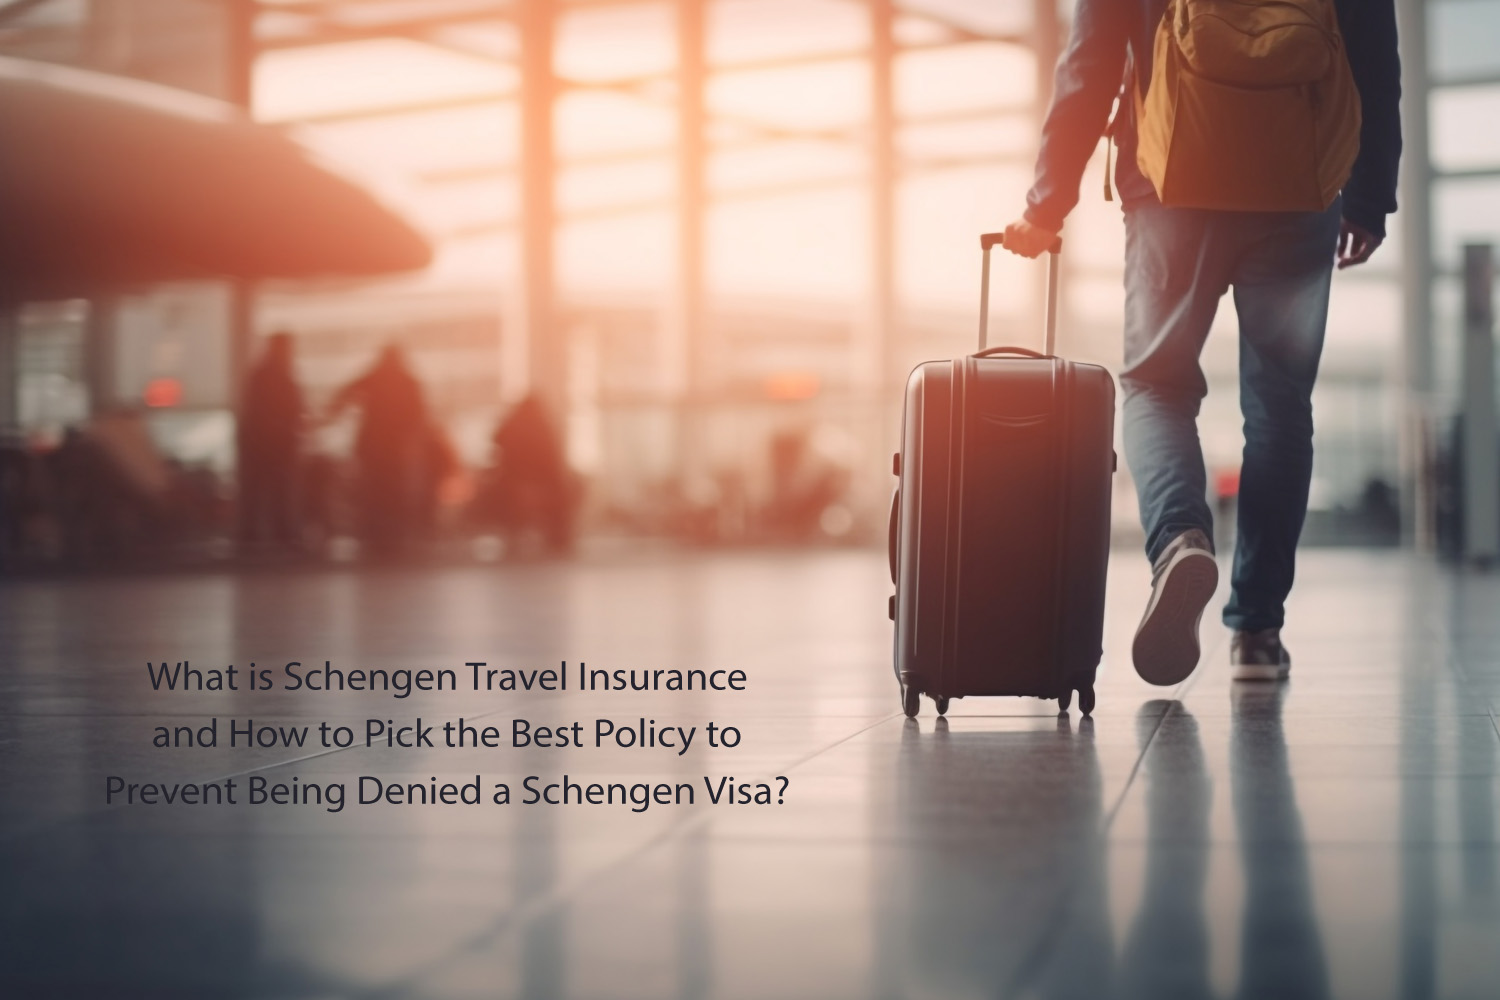 What is Schengen Travel Insurance and How to Pick the Best Policy to Prevent Being Denied a Schengen Visa?